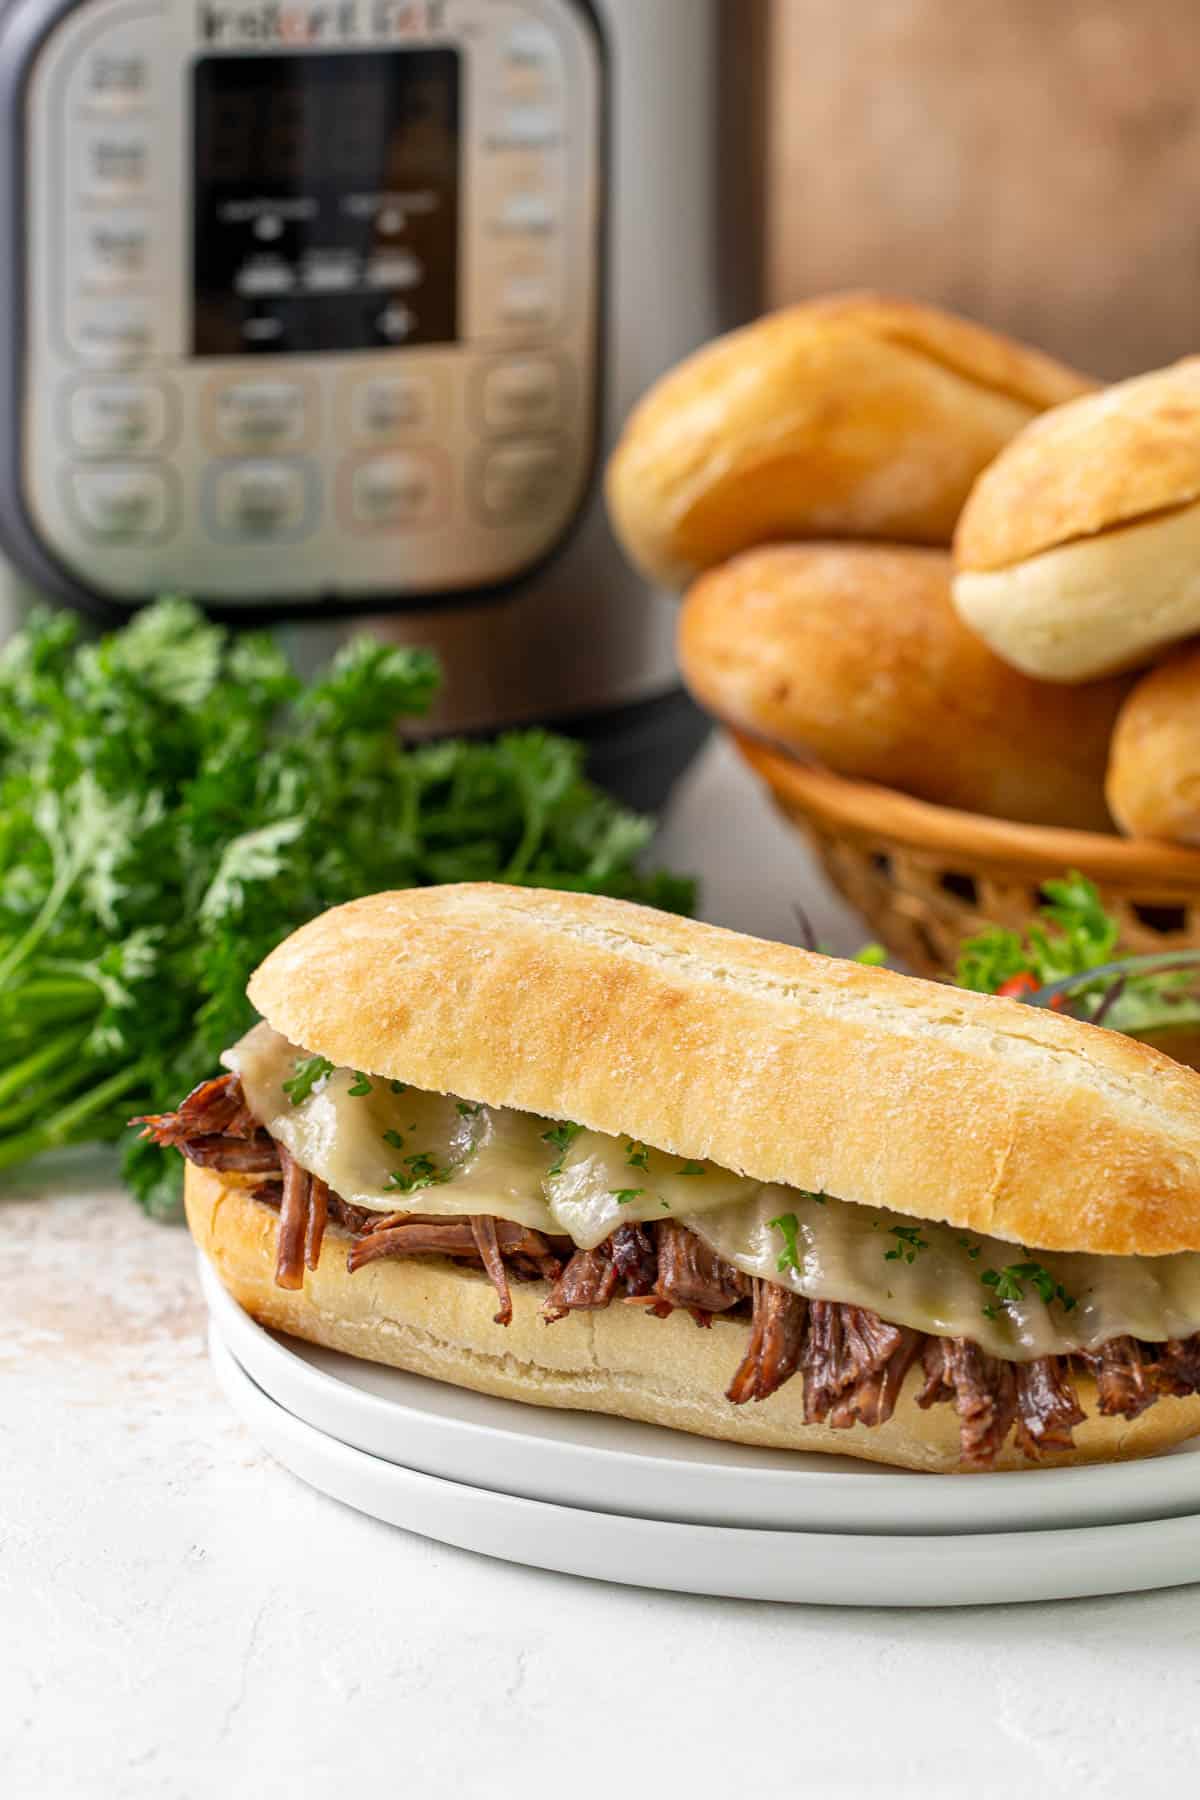 Front view of a French dip sandwich on a white plate. An instant pot is in the background.